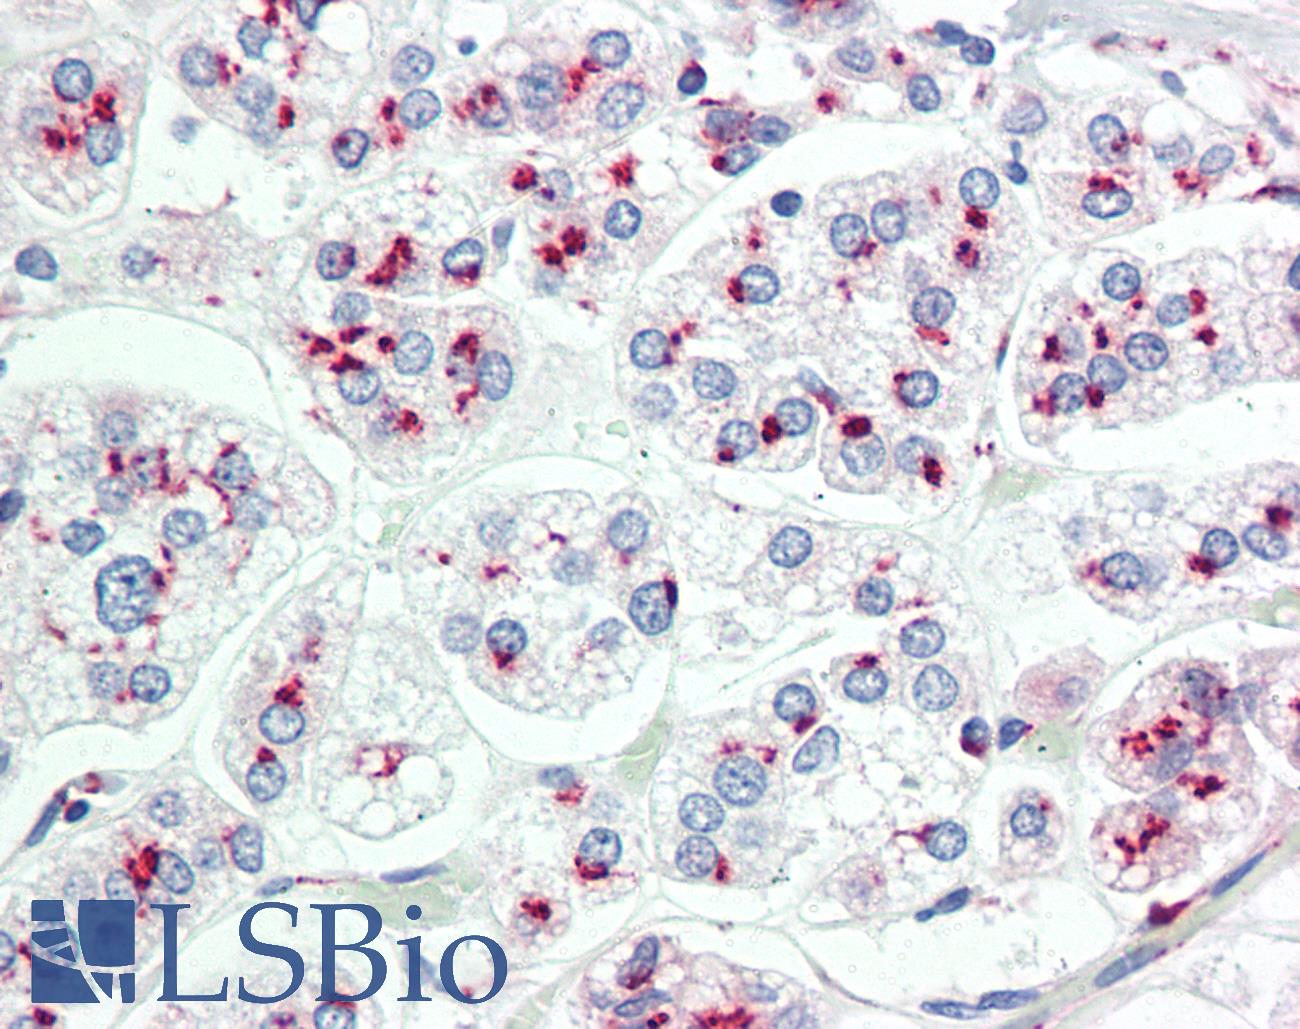 LIMD1 Antibody - Anti-LIMD1 antibody IHC staining of human adrenal. Immunohistochemistry of formalin-fixed, paraffin-embedded tissue after heat-induced antigen retrieval. Antibody dilution 1:100.